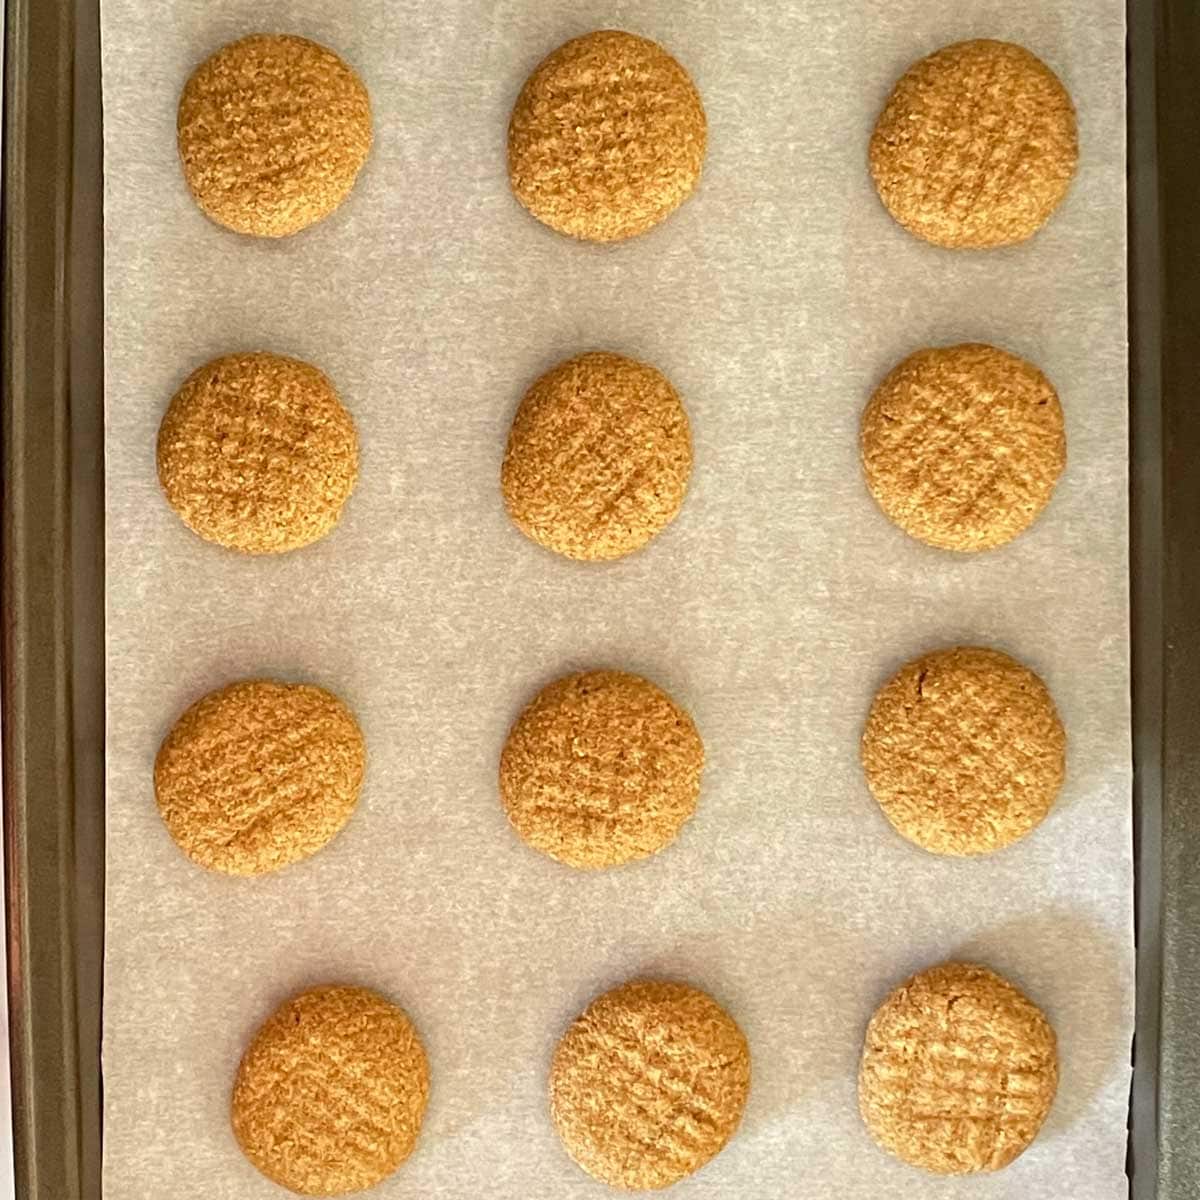 Almond-peanut-butter cookies ready to be baked.